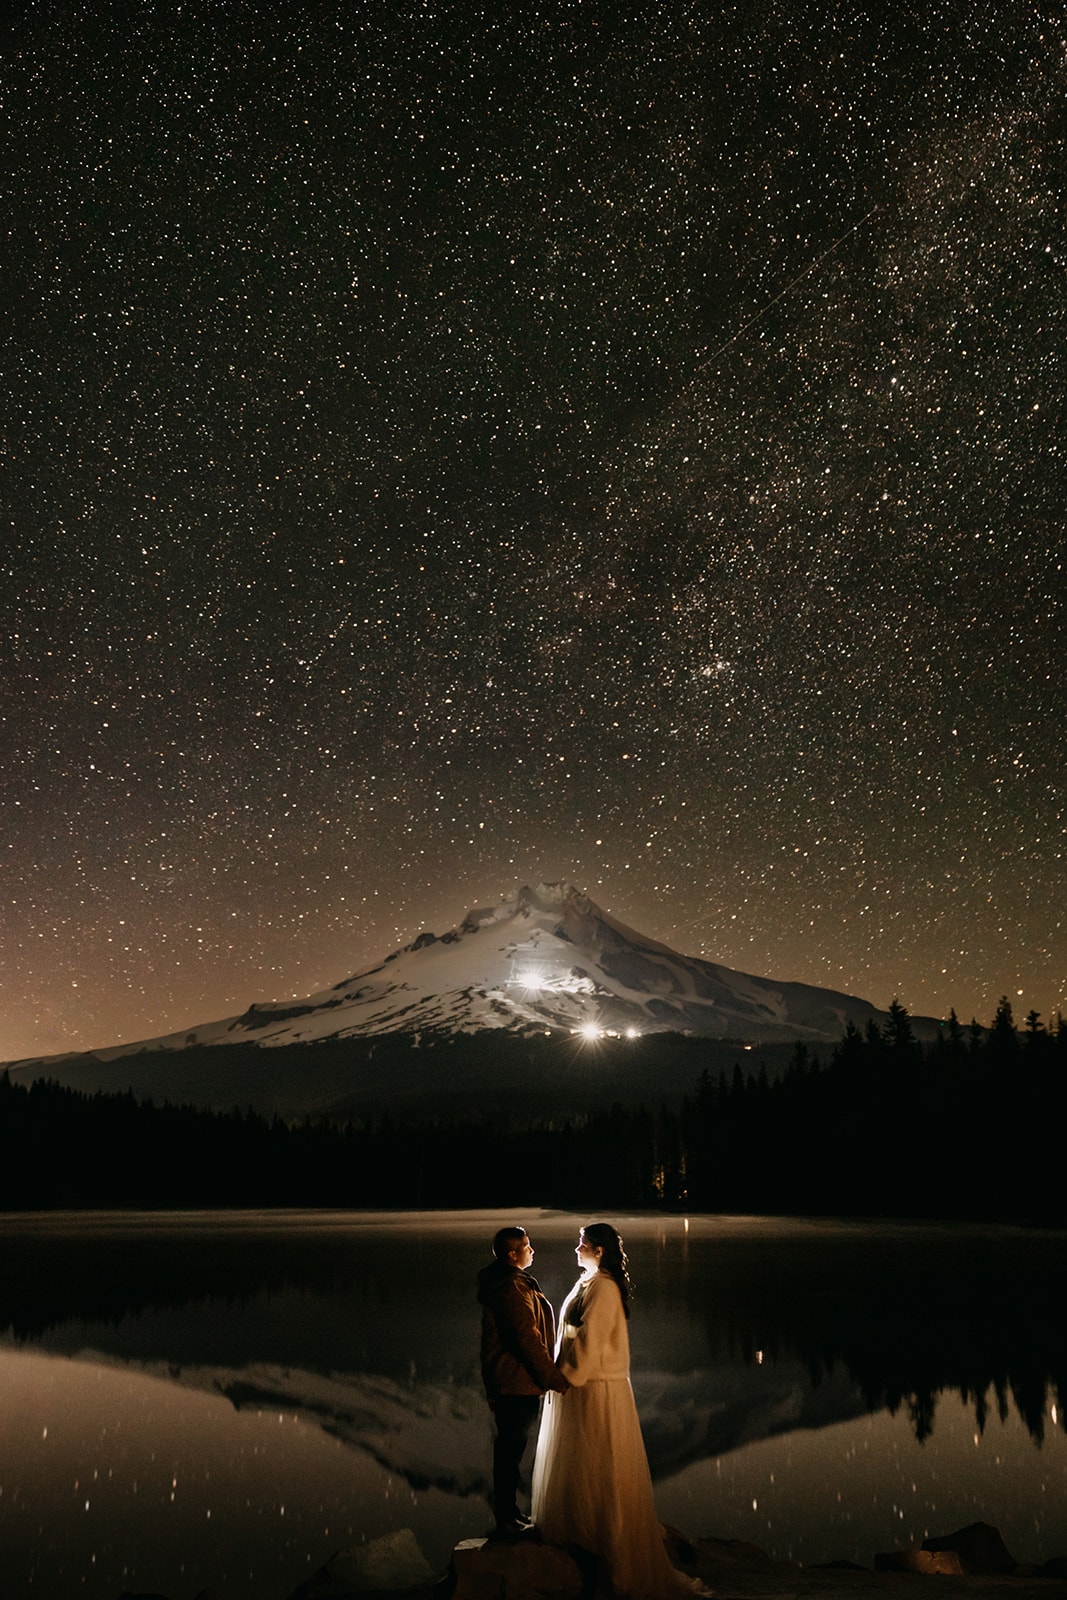 A couple stands under the milky way by a mountain.